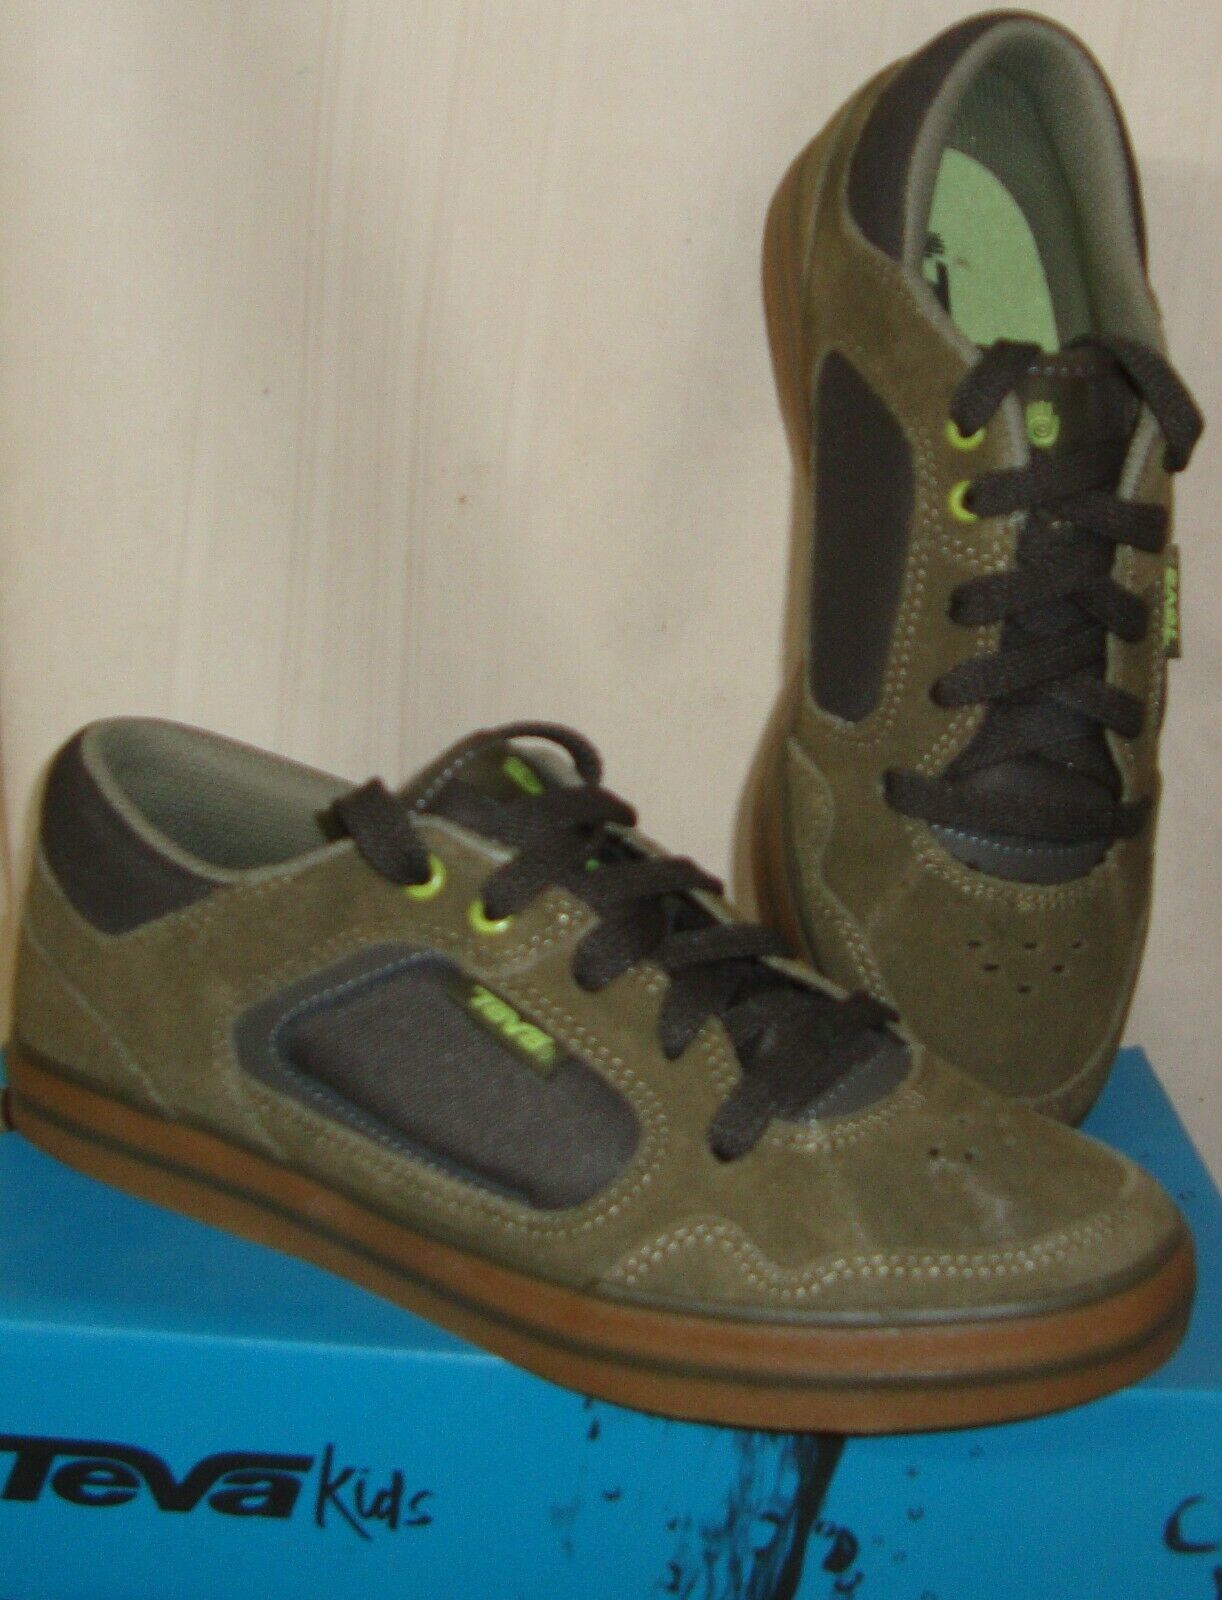 Teva Crank J KIDS Dark Olive Lace Up Sneakers Youth Size US 5 NEW 1001968 - $29.69